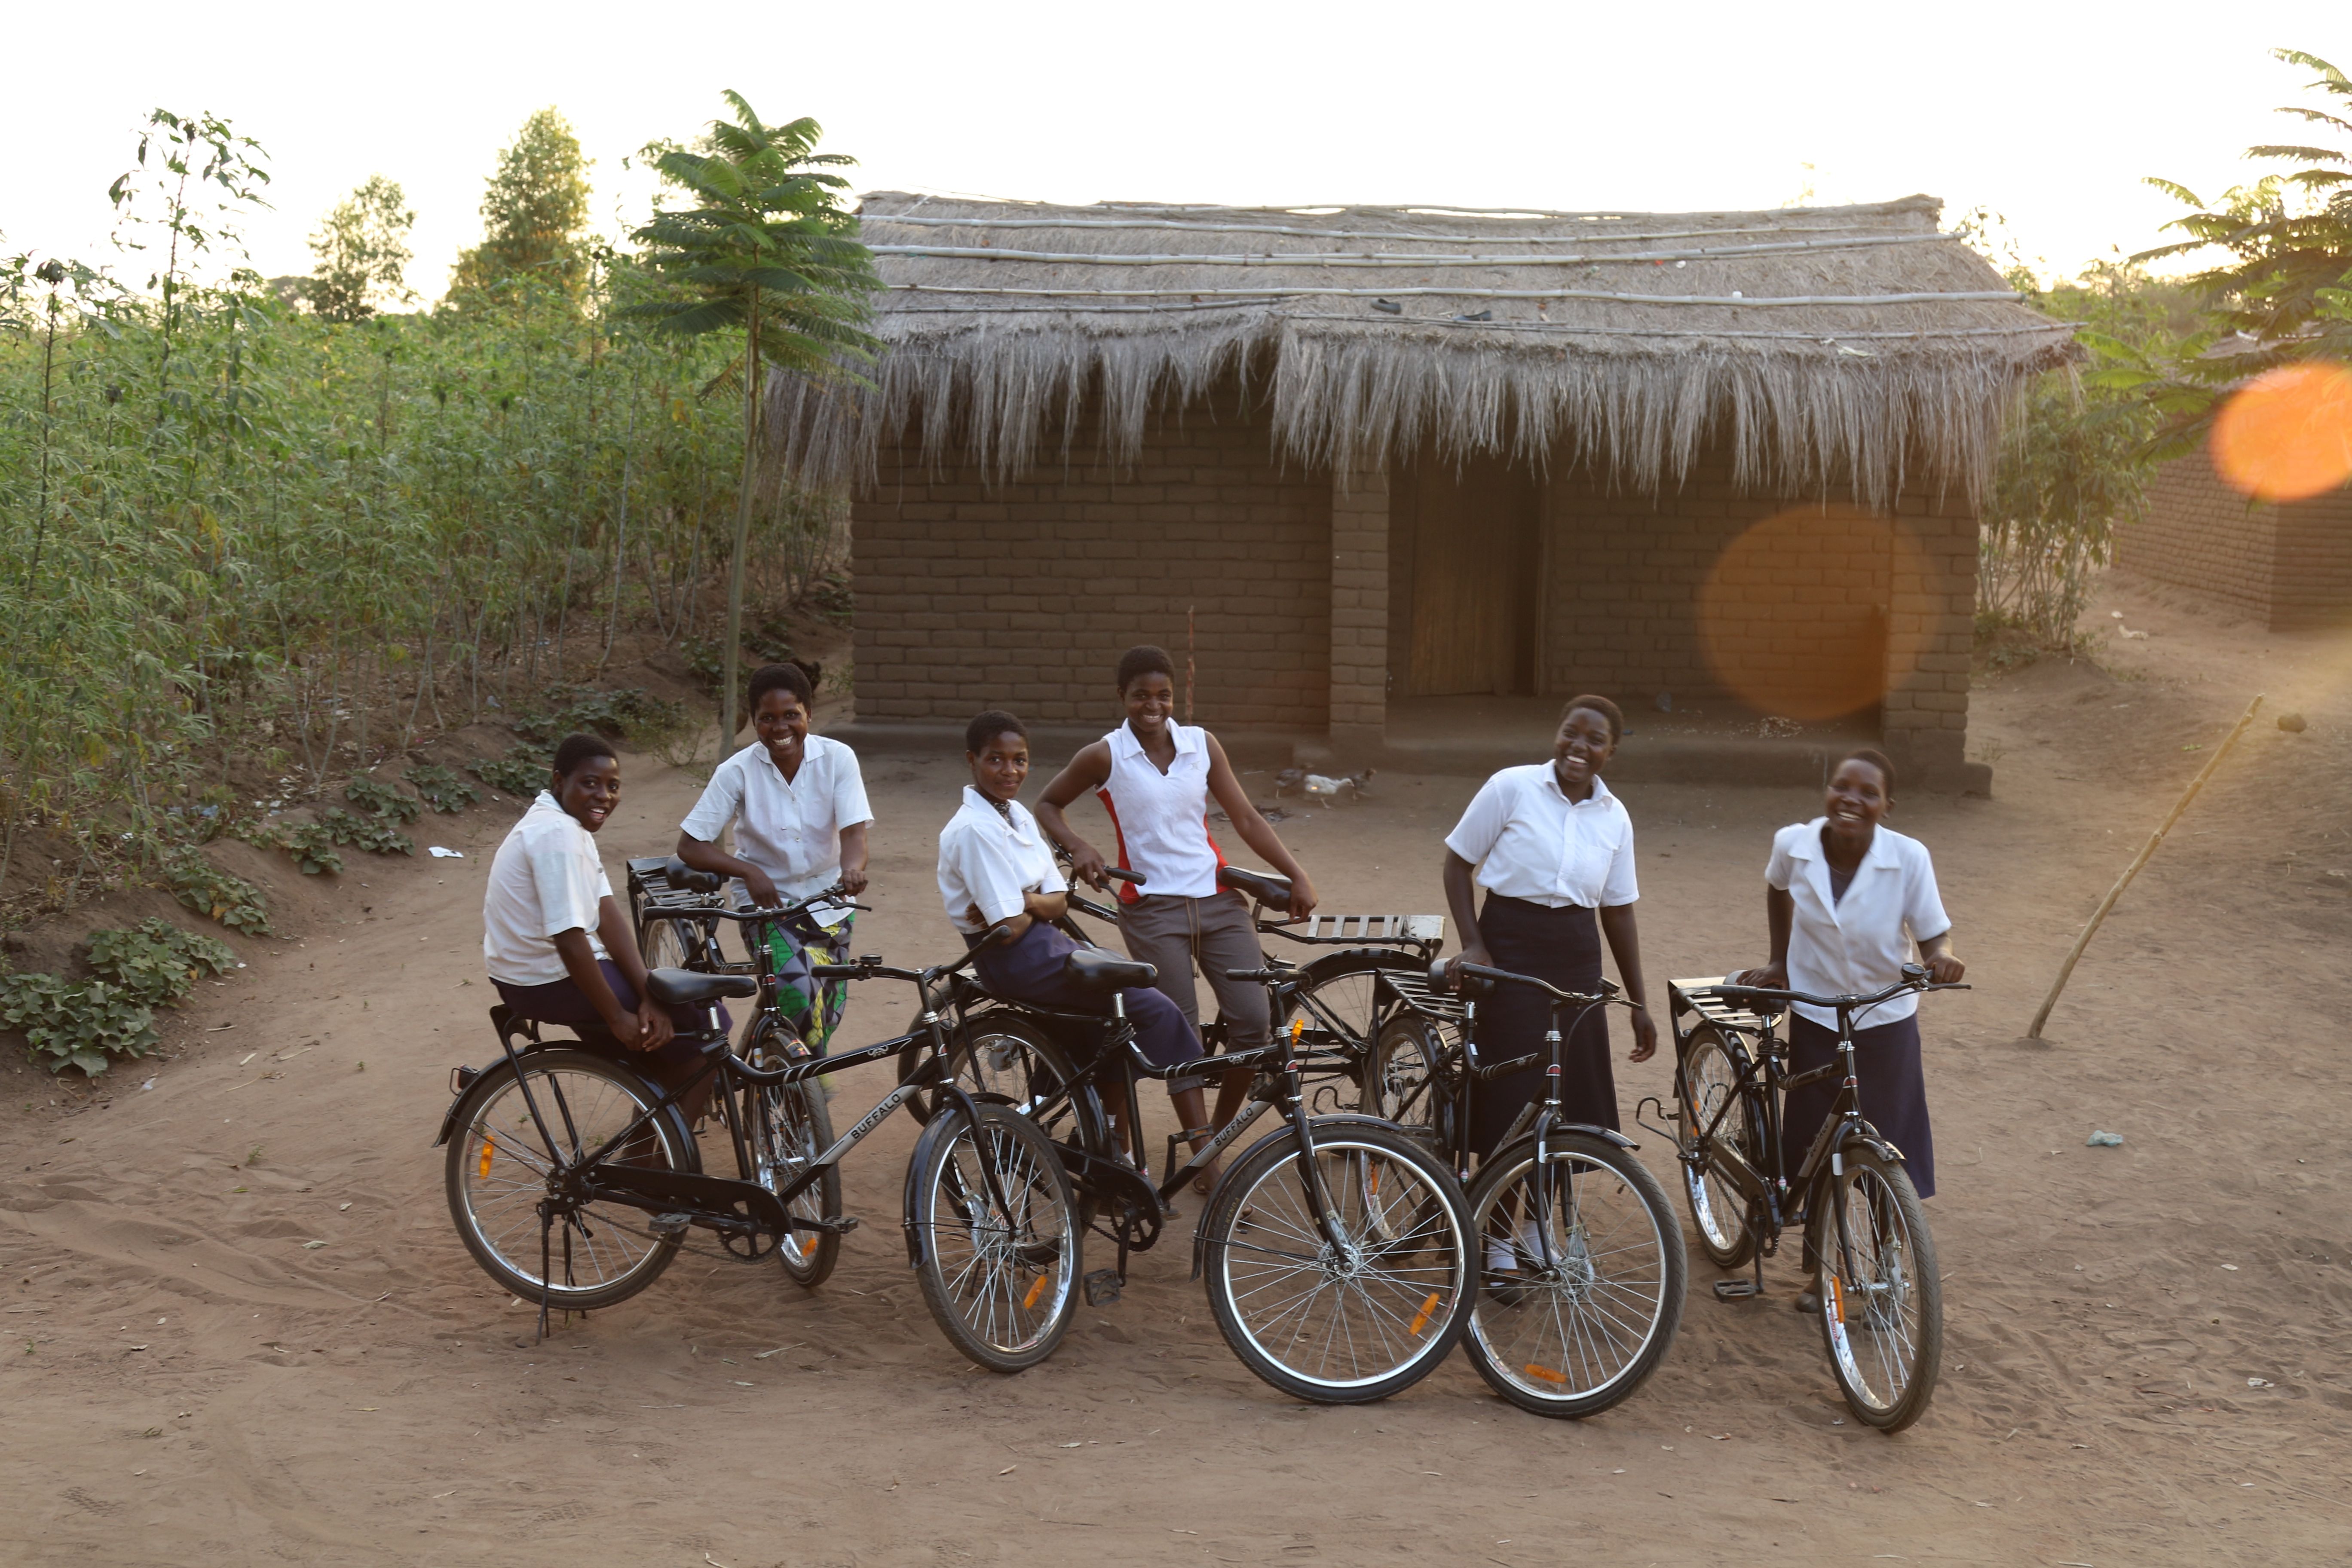 Participants of the Women on Wheels campaign in Malawi